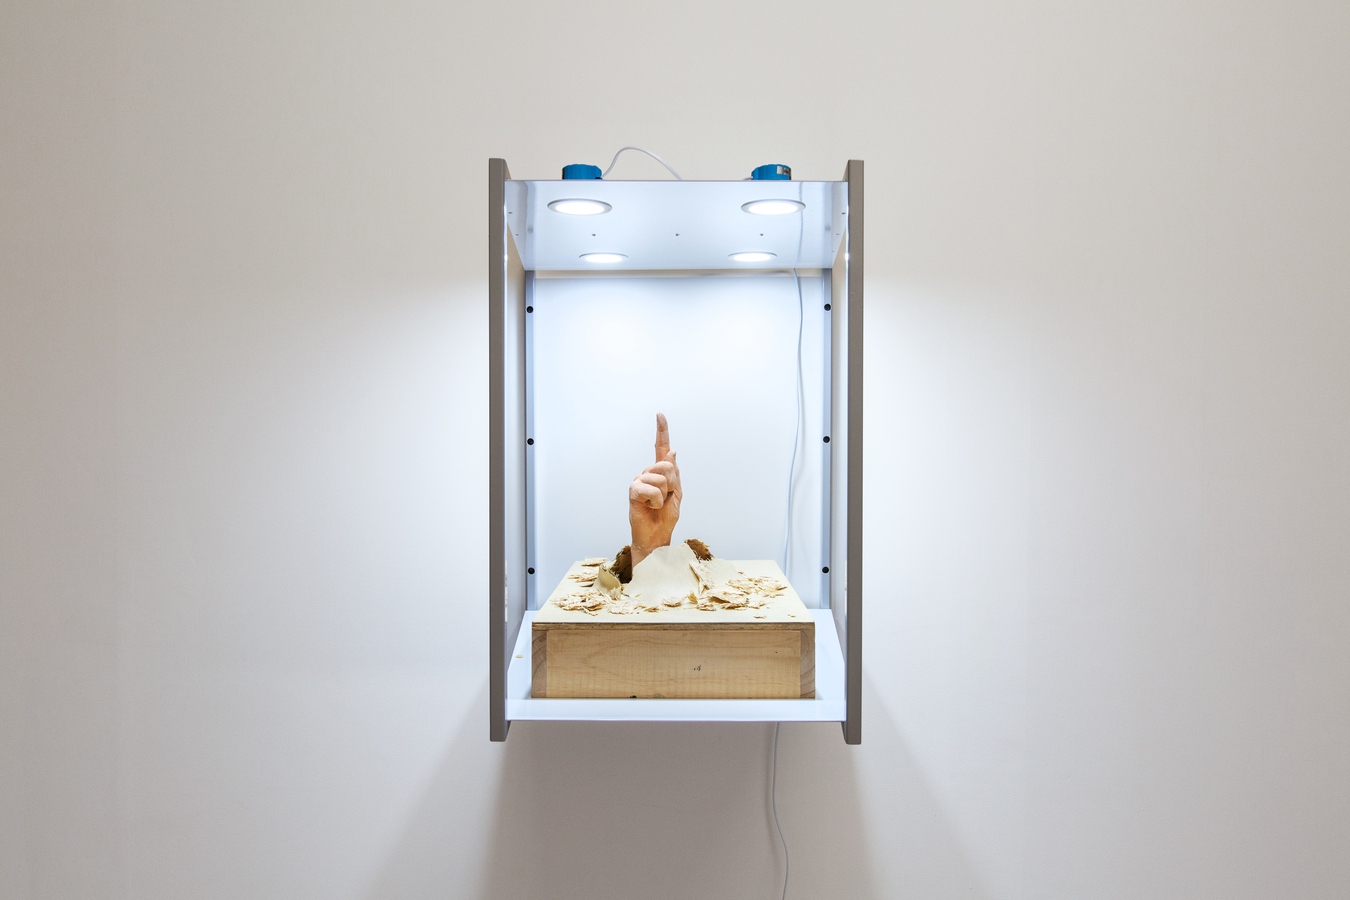 Image: Eddie Clemens, Invitational Kiosk Archive Platform, 2020 and Sam Eng, Watch the Waiting!, 2007.